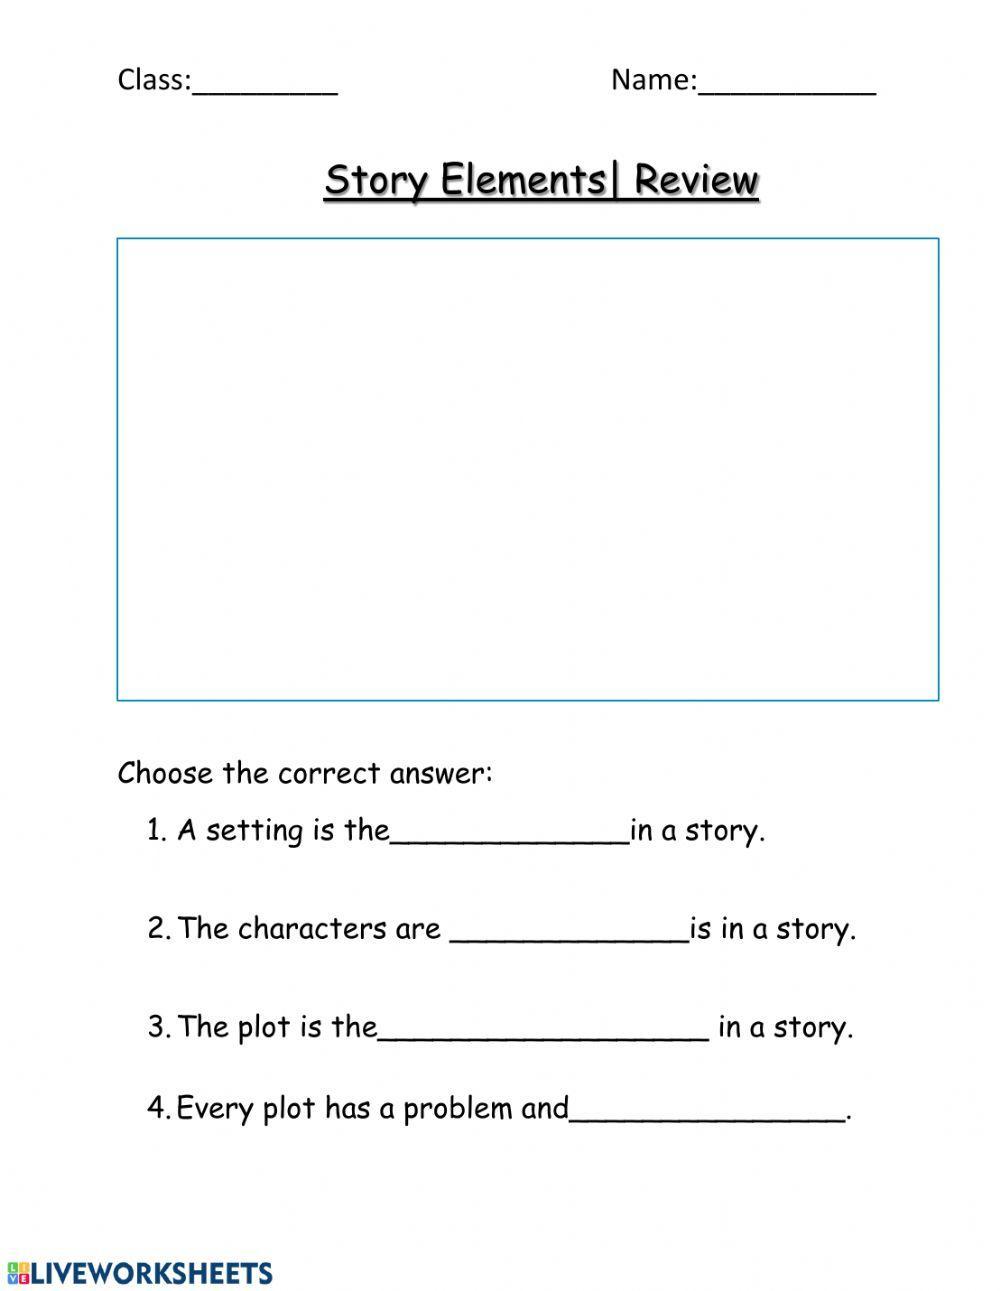 Story Elements Review